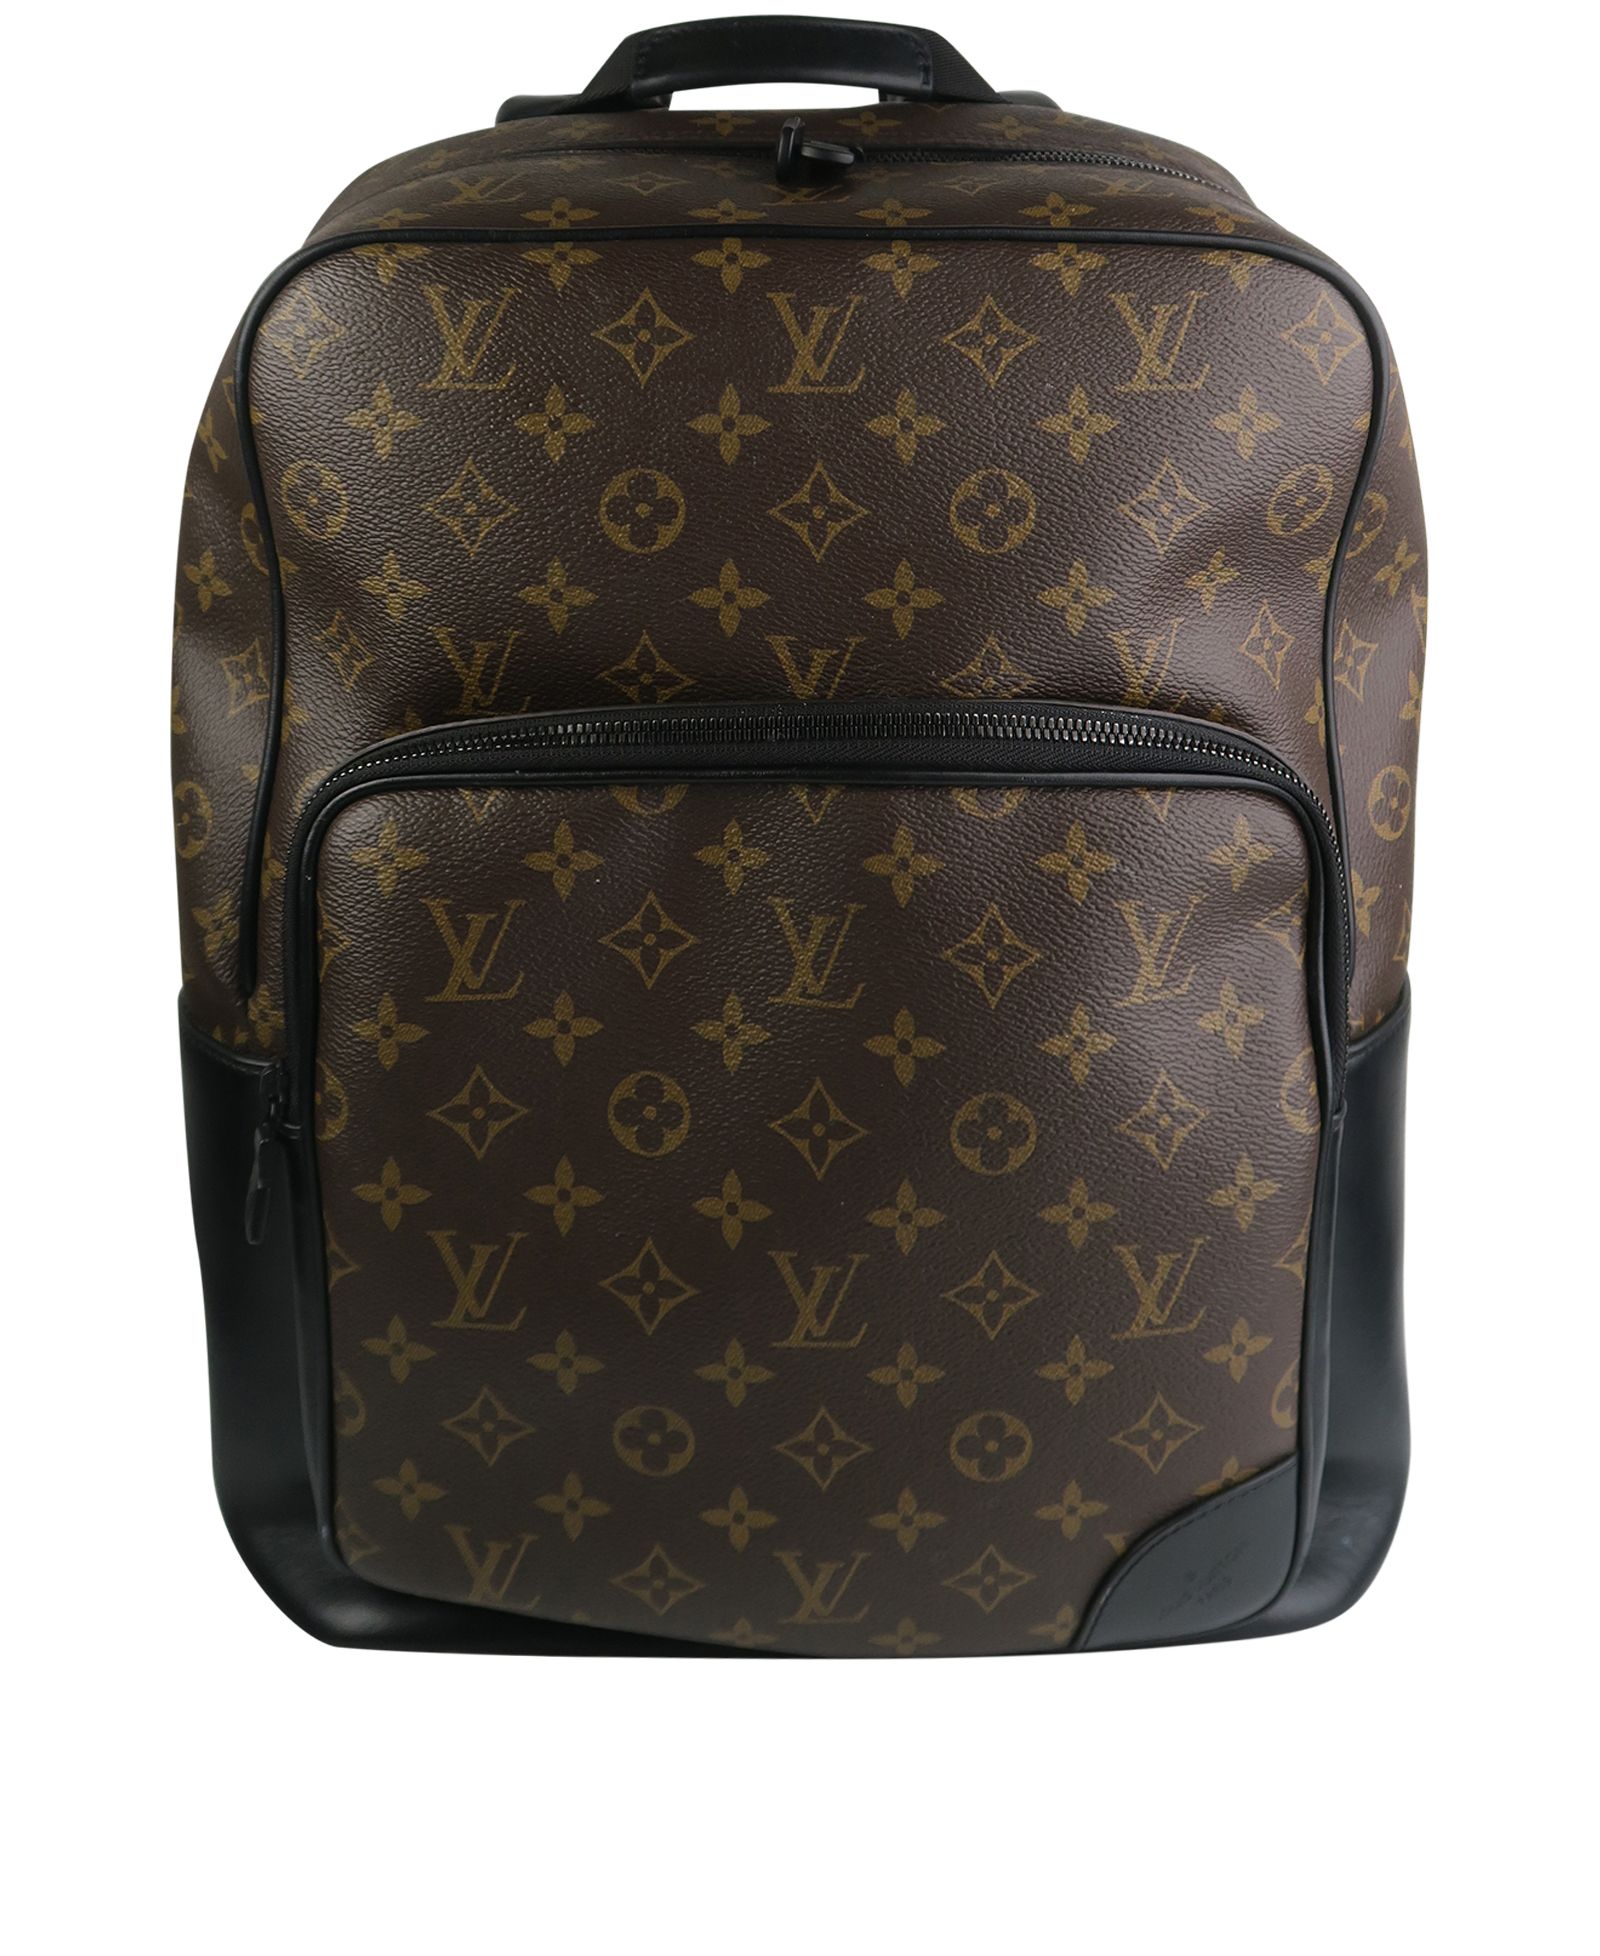 Louis Vuitton Dean BackPack  Unboxing and First Impression 